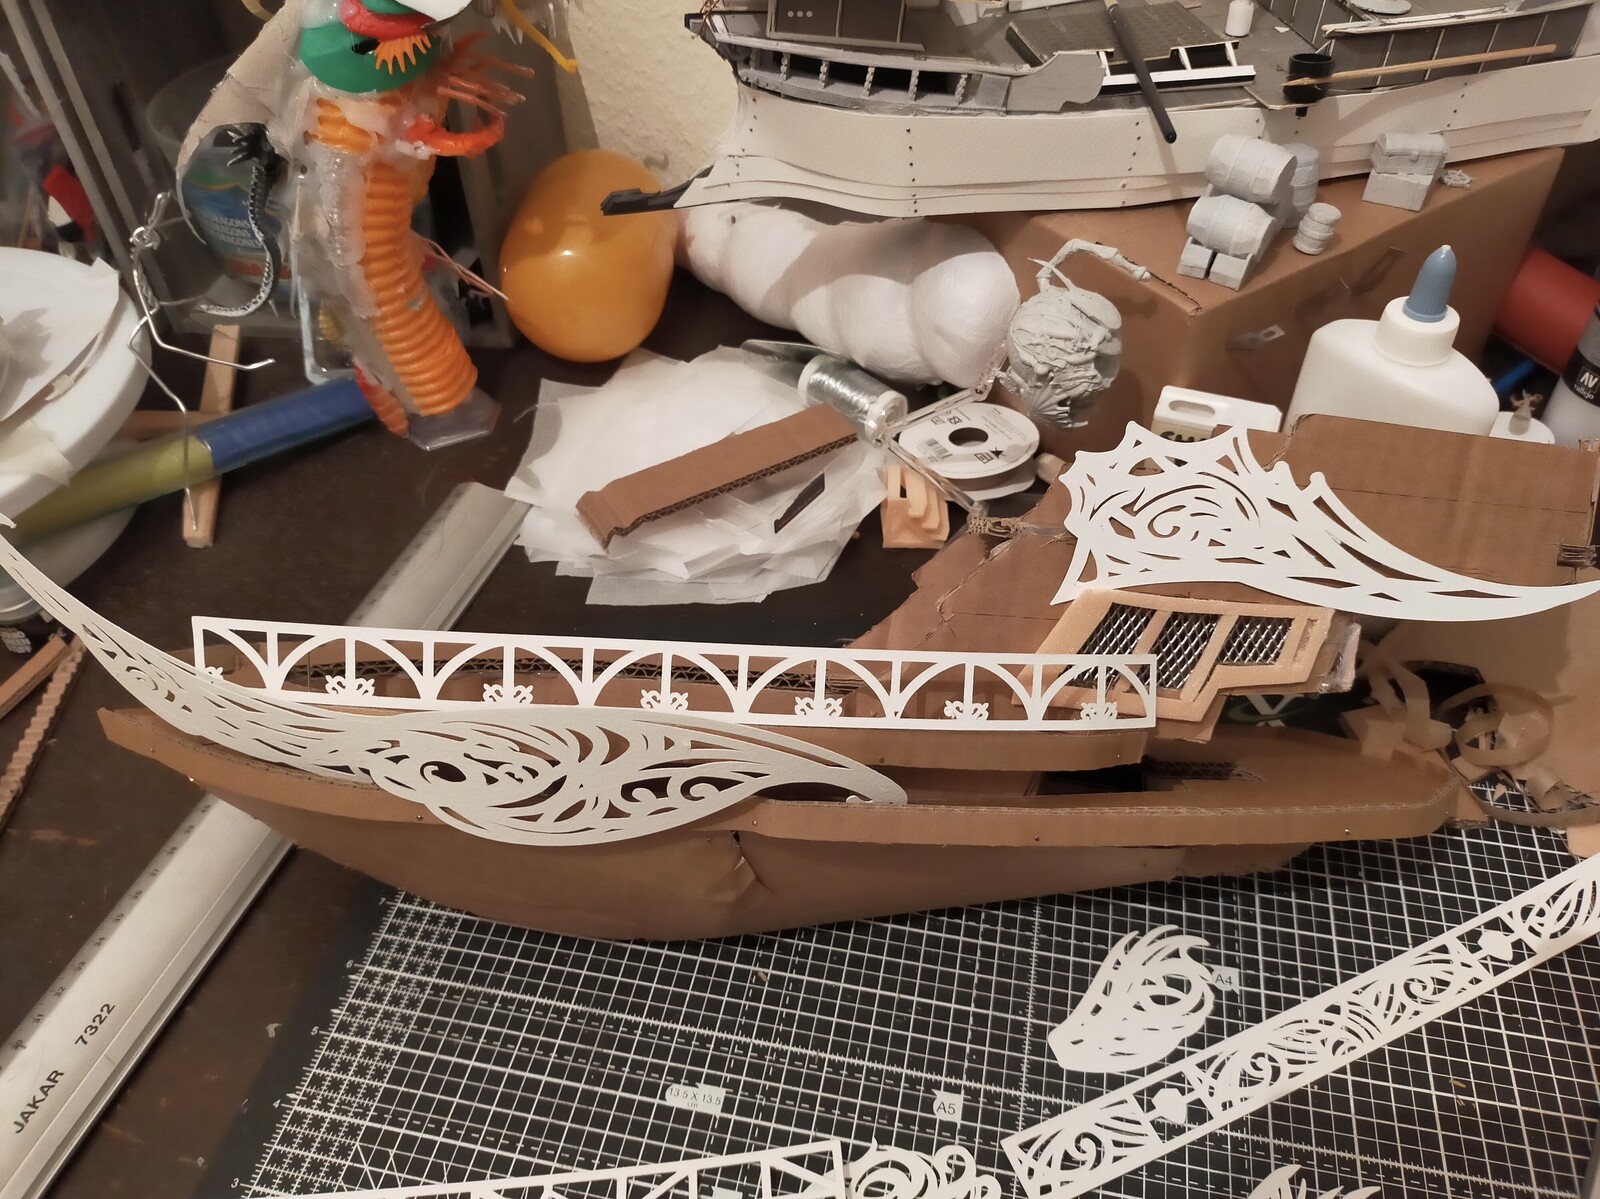 Adding the pepper cut fretwork as both practical handrail and hull decoration.